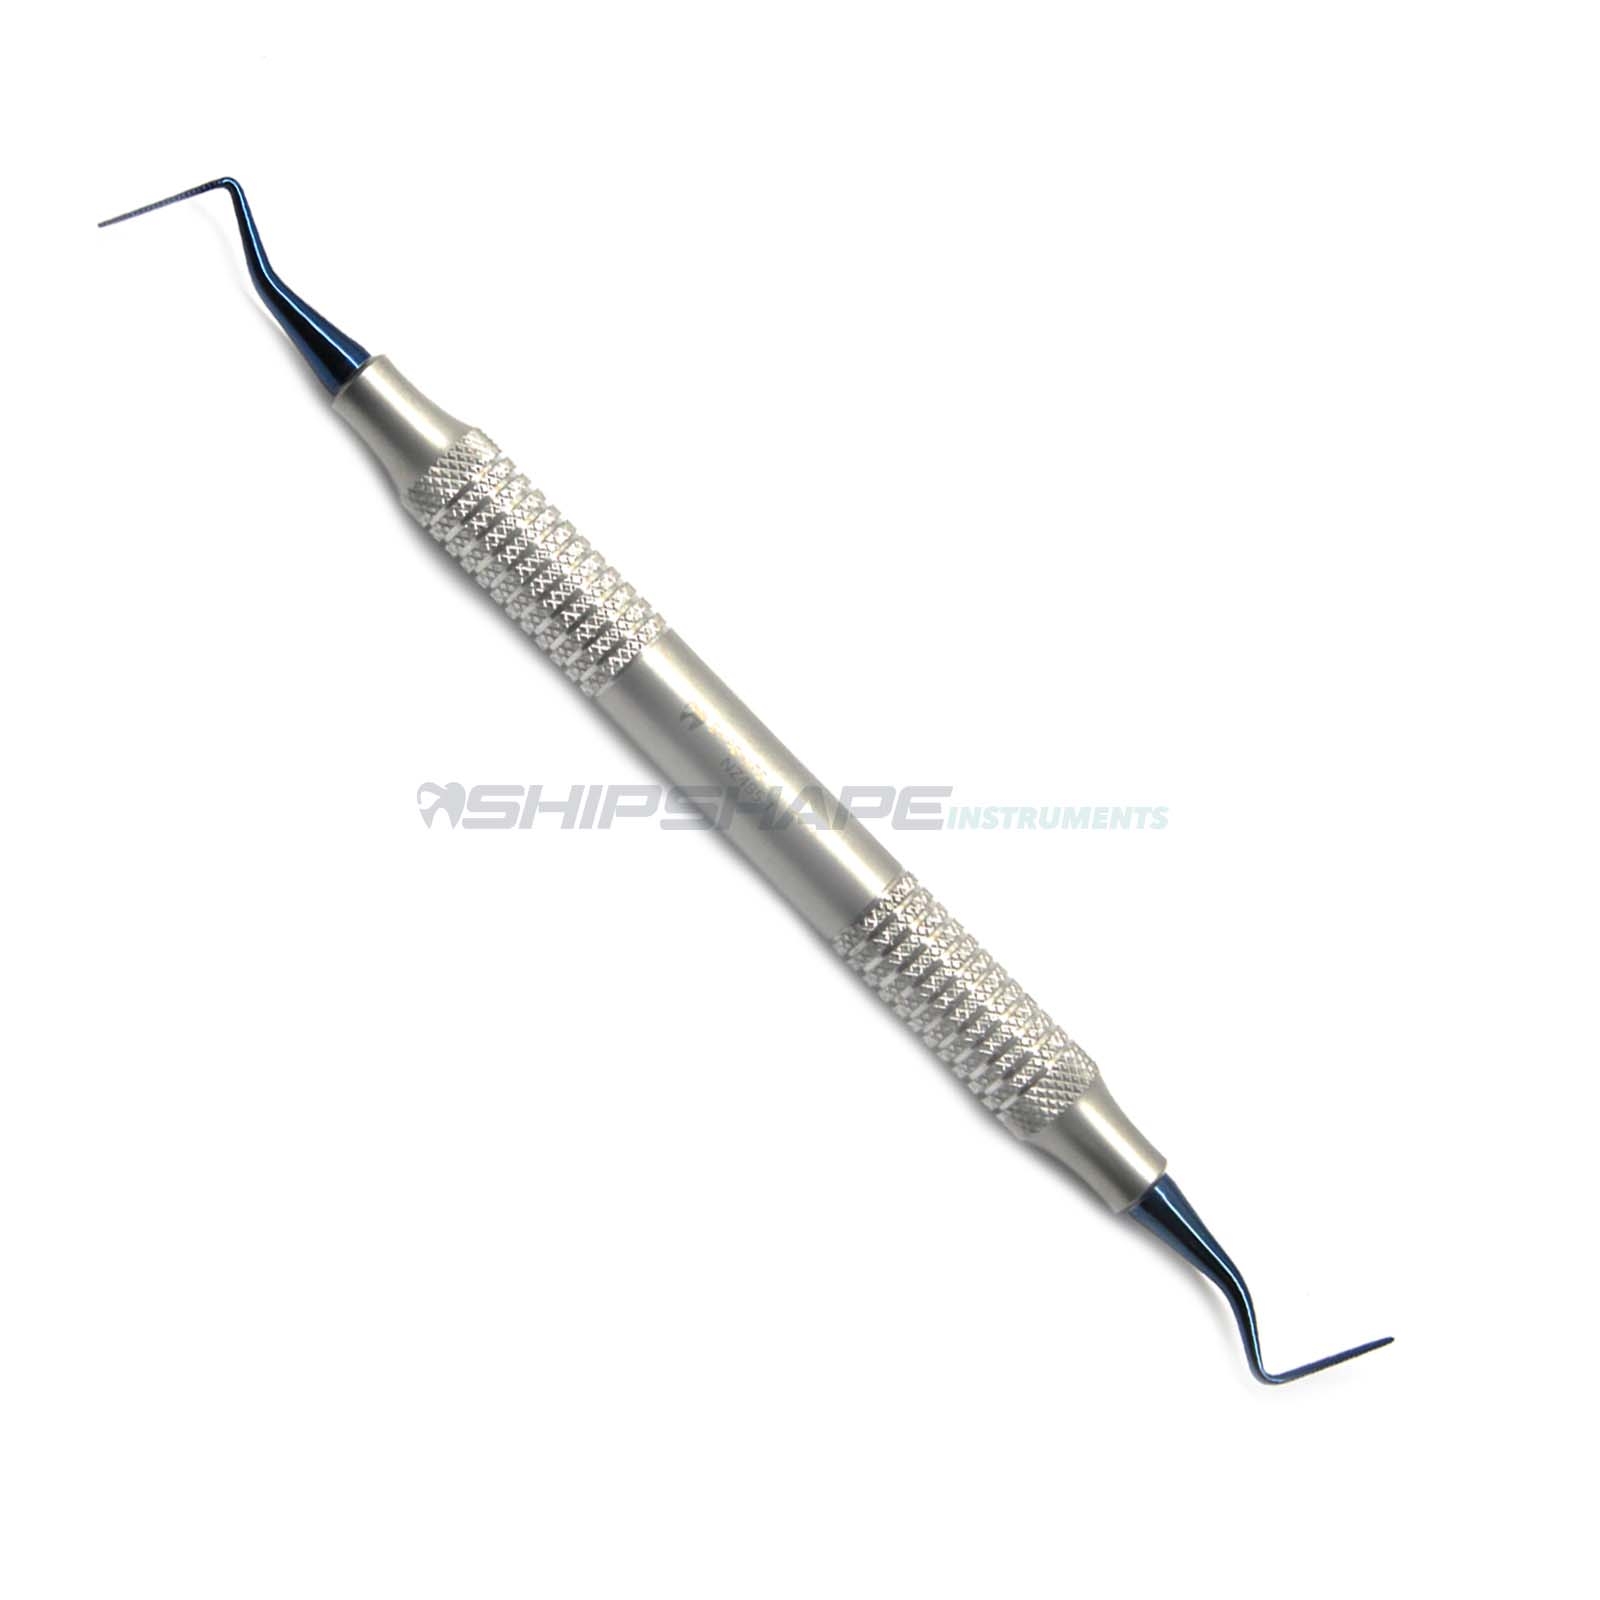 Periotome PT-1 Implant Placement Serrated Posterior Extraction Instruments Shipshape -1277